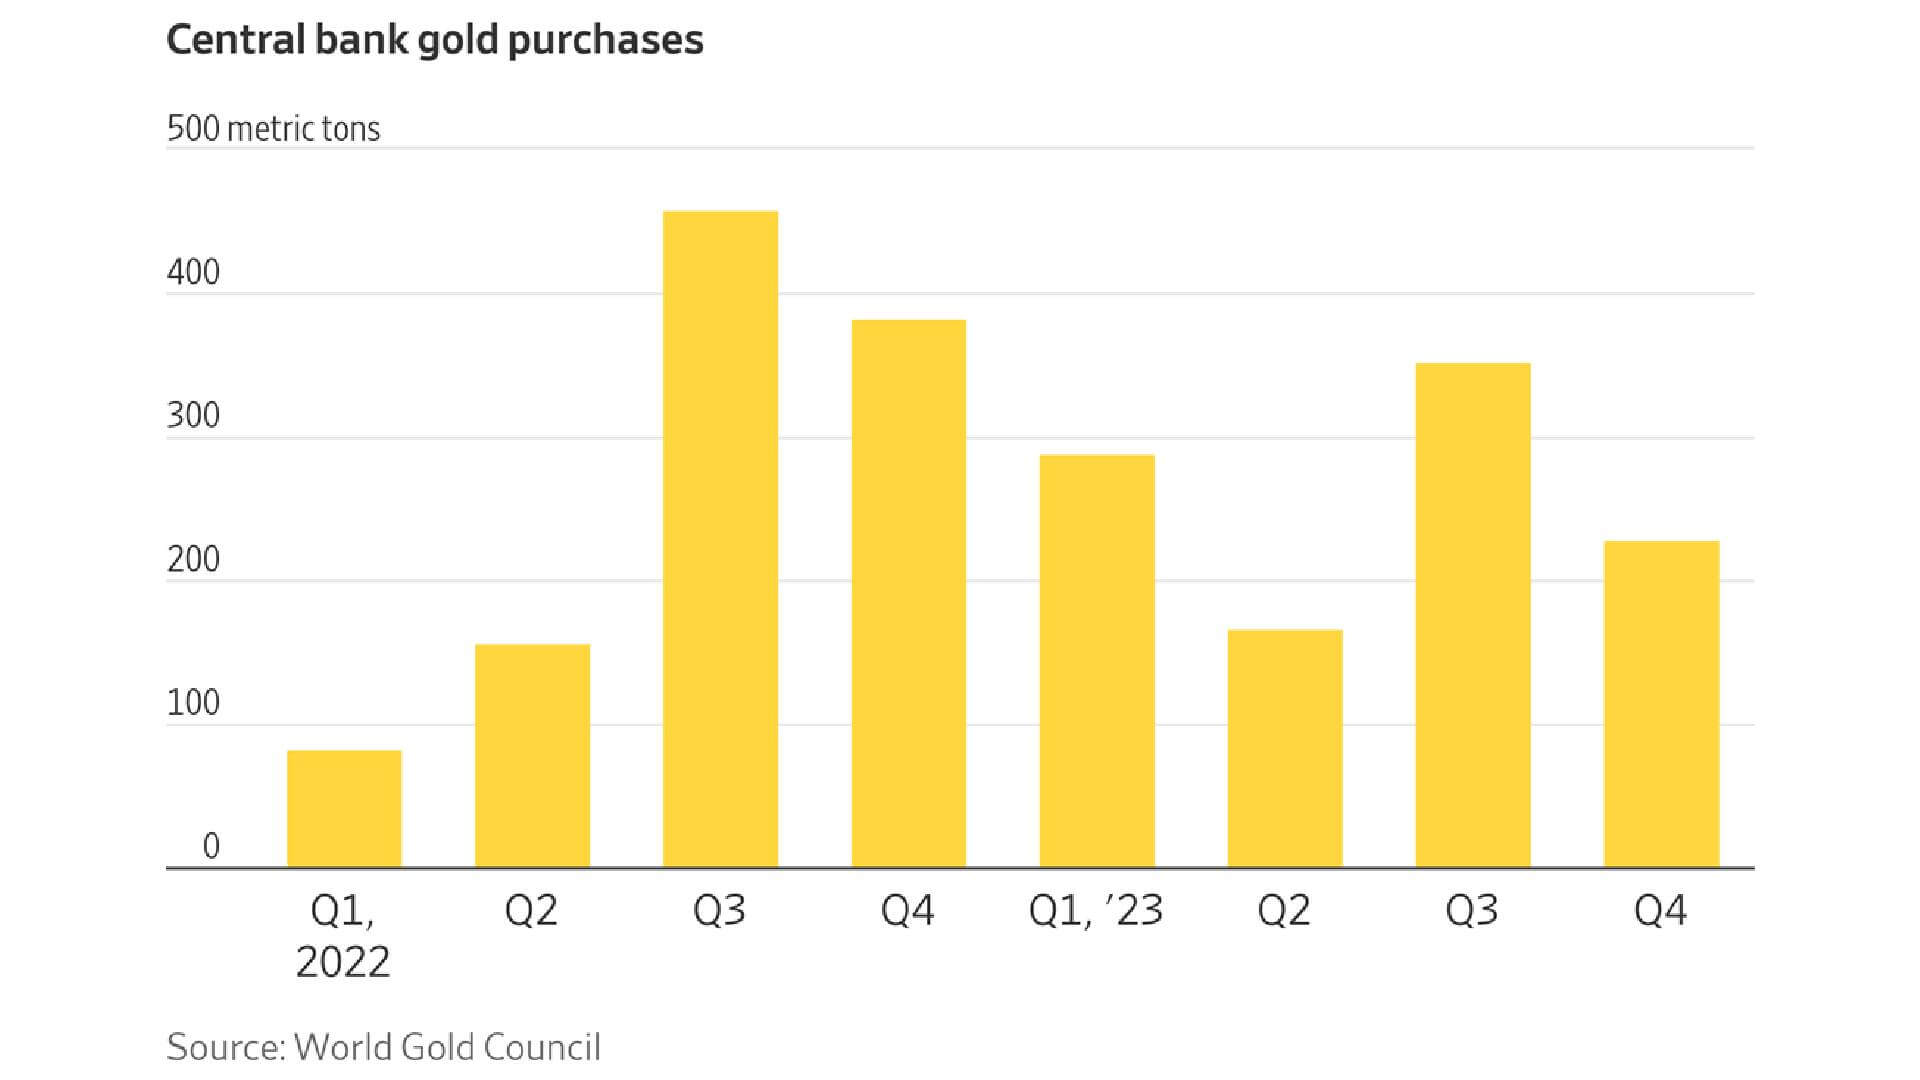 A chart showing central bank gold purchases by quarter.